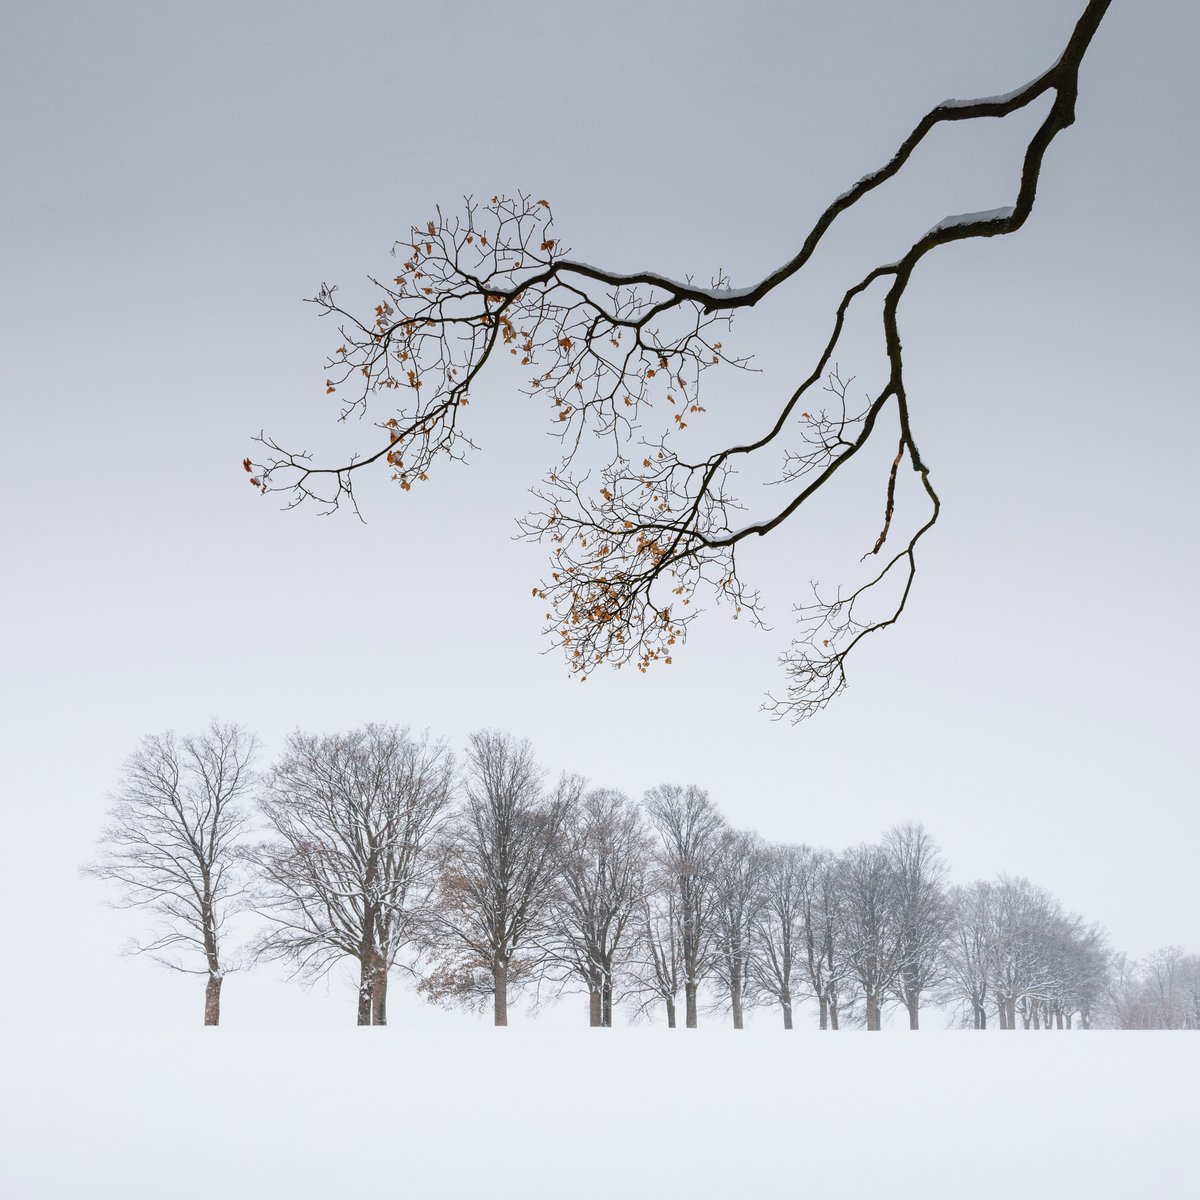 Enter your striking shots into the world's leading photography competitions FOR FREE to win incredible prizes: bit.ly/SWPA-OPEN

© Martin Rak, Czech Republic, Shortlist, Open Competition, Landscape, Sony World Photography Awards 2023

#photocontest #photocompetition